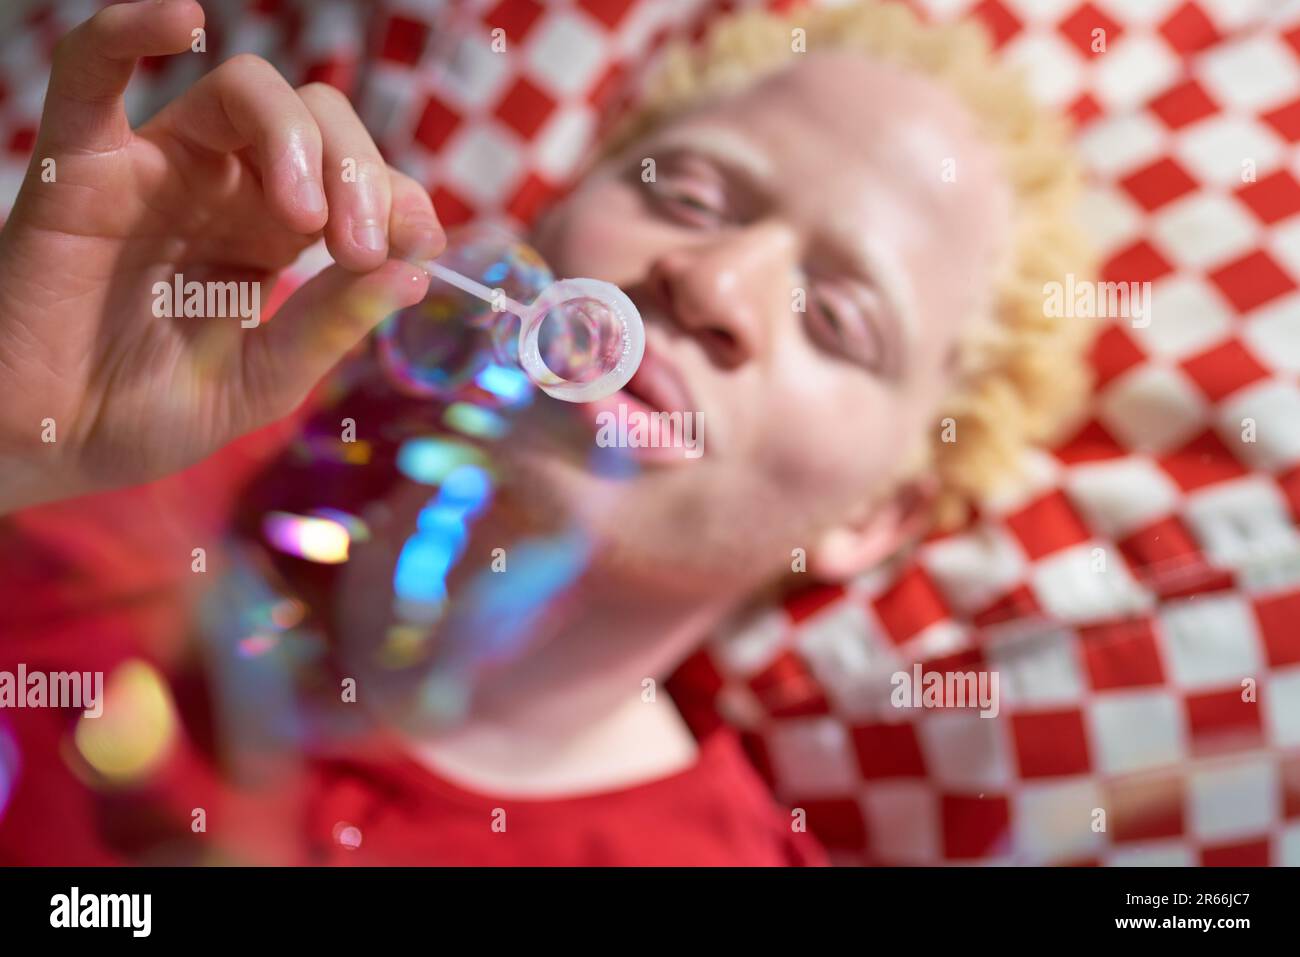 Young man blowing bubbles with bubble wand Stock Photo